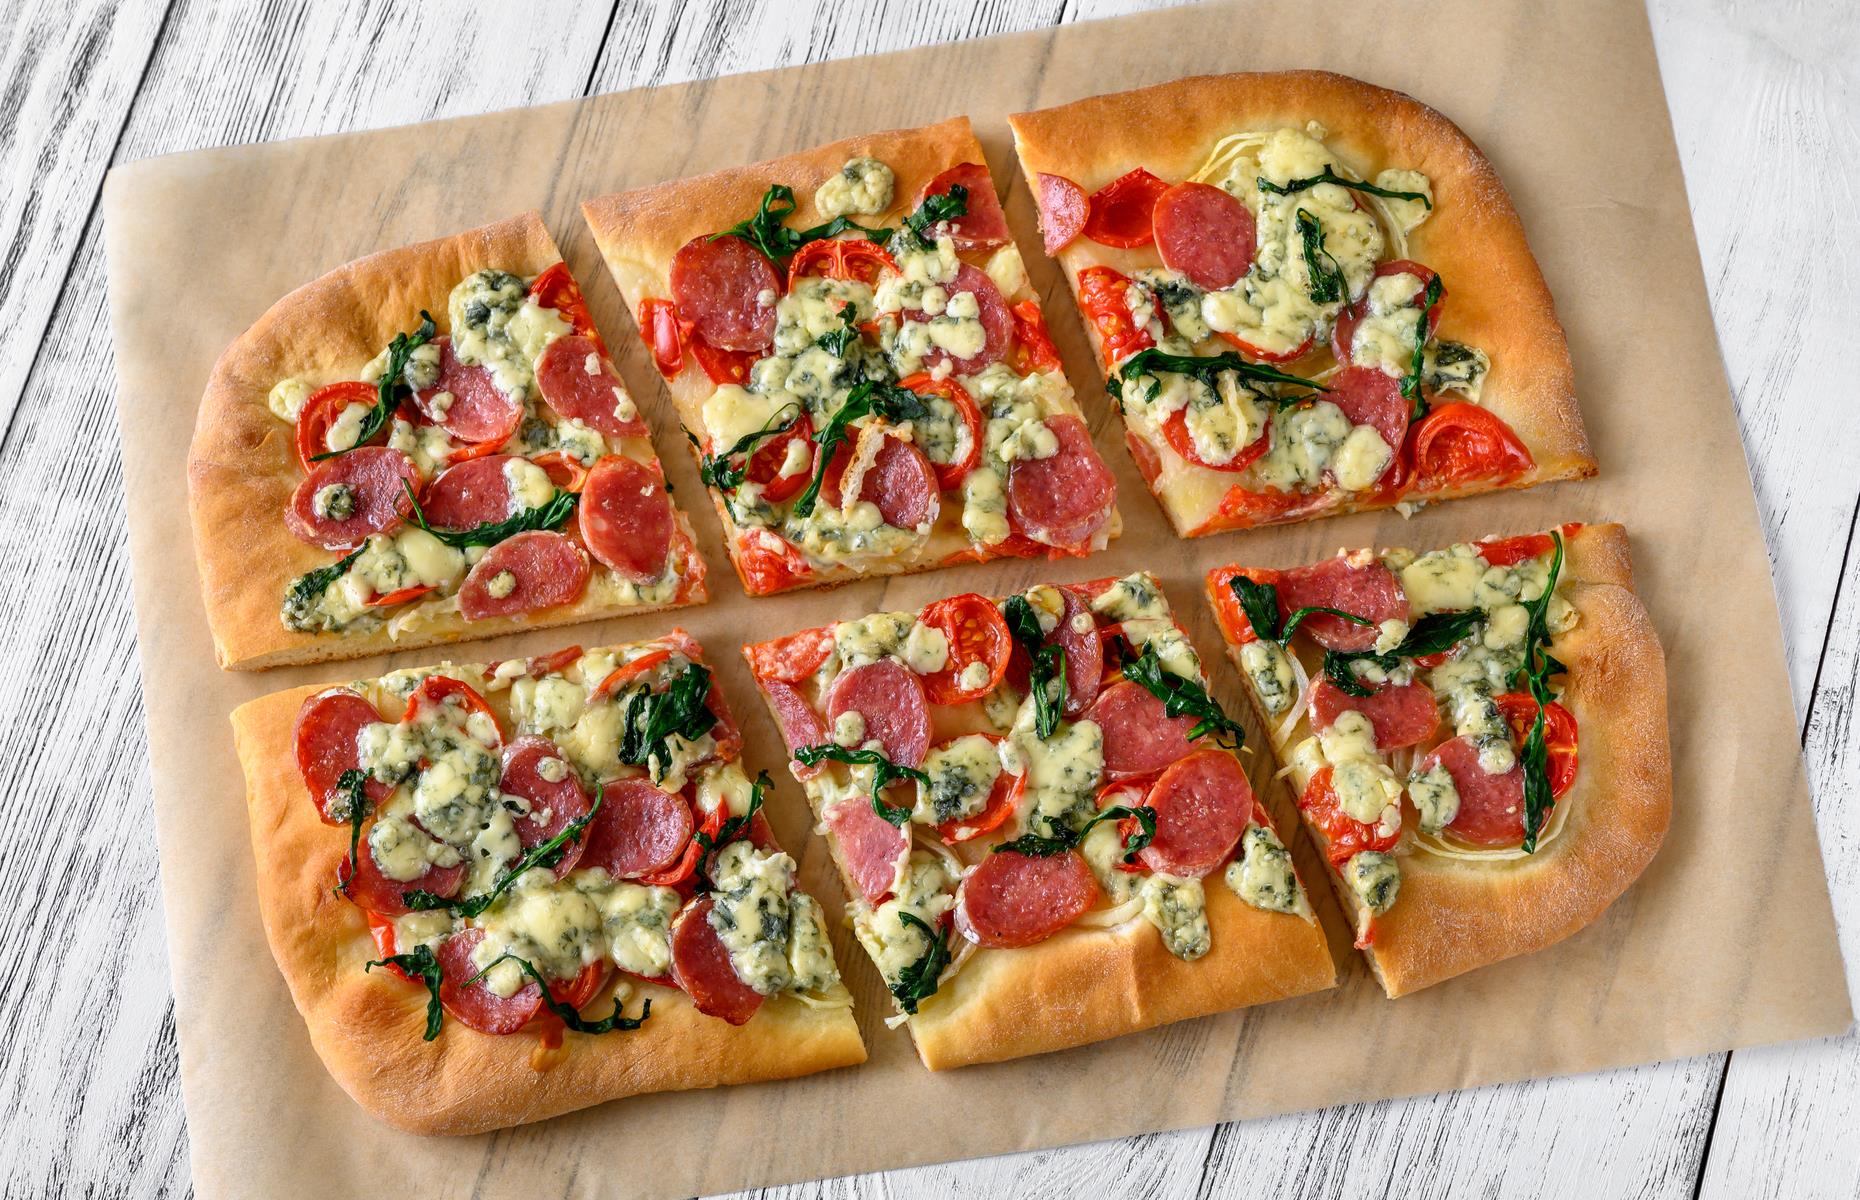 <p>In northern Spain, these pizzas are known as coca. Rectangular in shape, they are topped with tomato, a local creamy blue cheese, garlic, smoked paprika and a local sausage similar to salami or chorizo. It's a very good combination for any pizza.</p>  <p><a href="https://www.lovefood.com/recipes/58369/spanish-pizza-coca-with-soft-blue-cheese-and-cured-sausage"><strong>Get the recipe for coca here</strong></a></p>